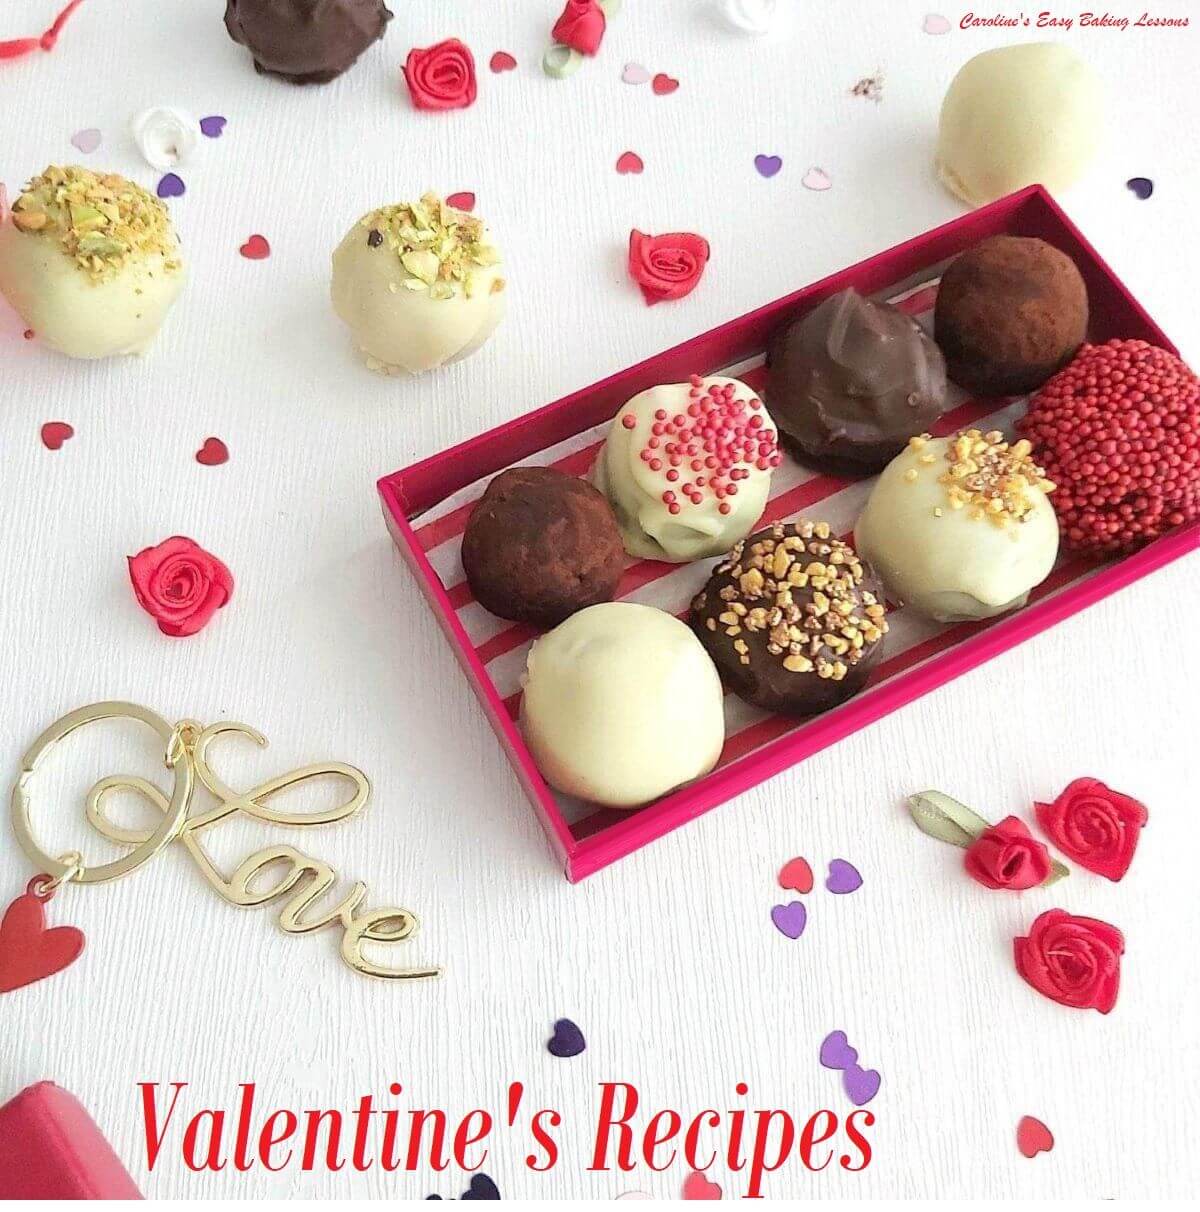 bright white table with red small rectangular box of 8 cake truffles, some on the table and red sprinkles and love keyring and title valentines recipes.